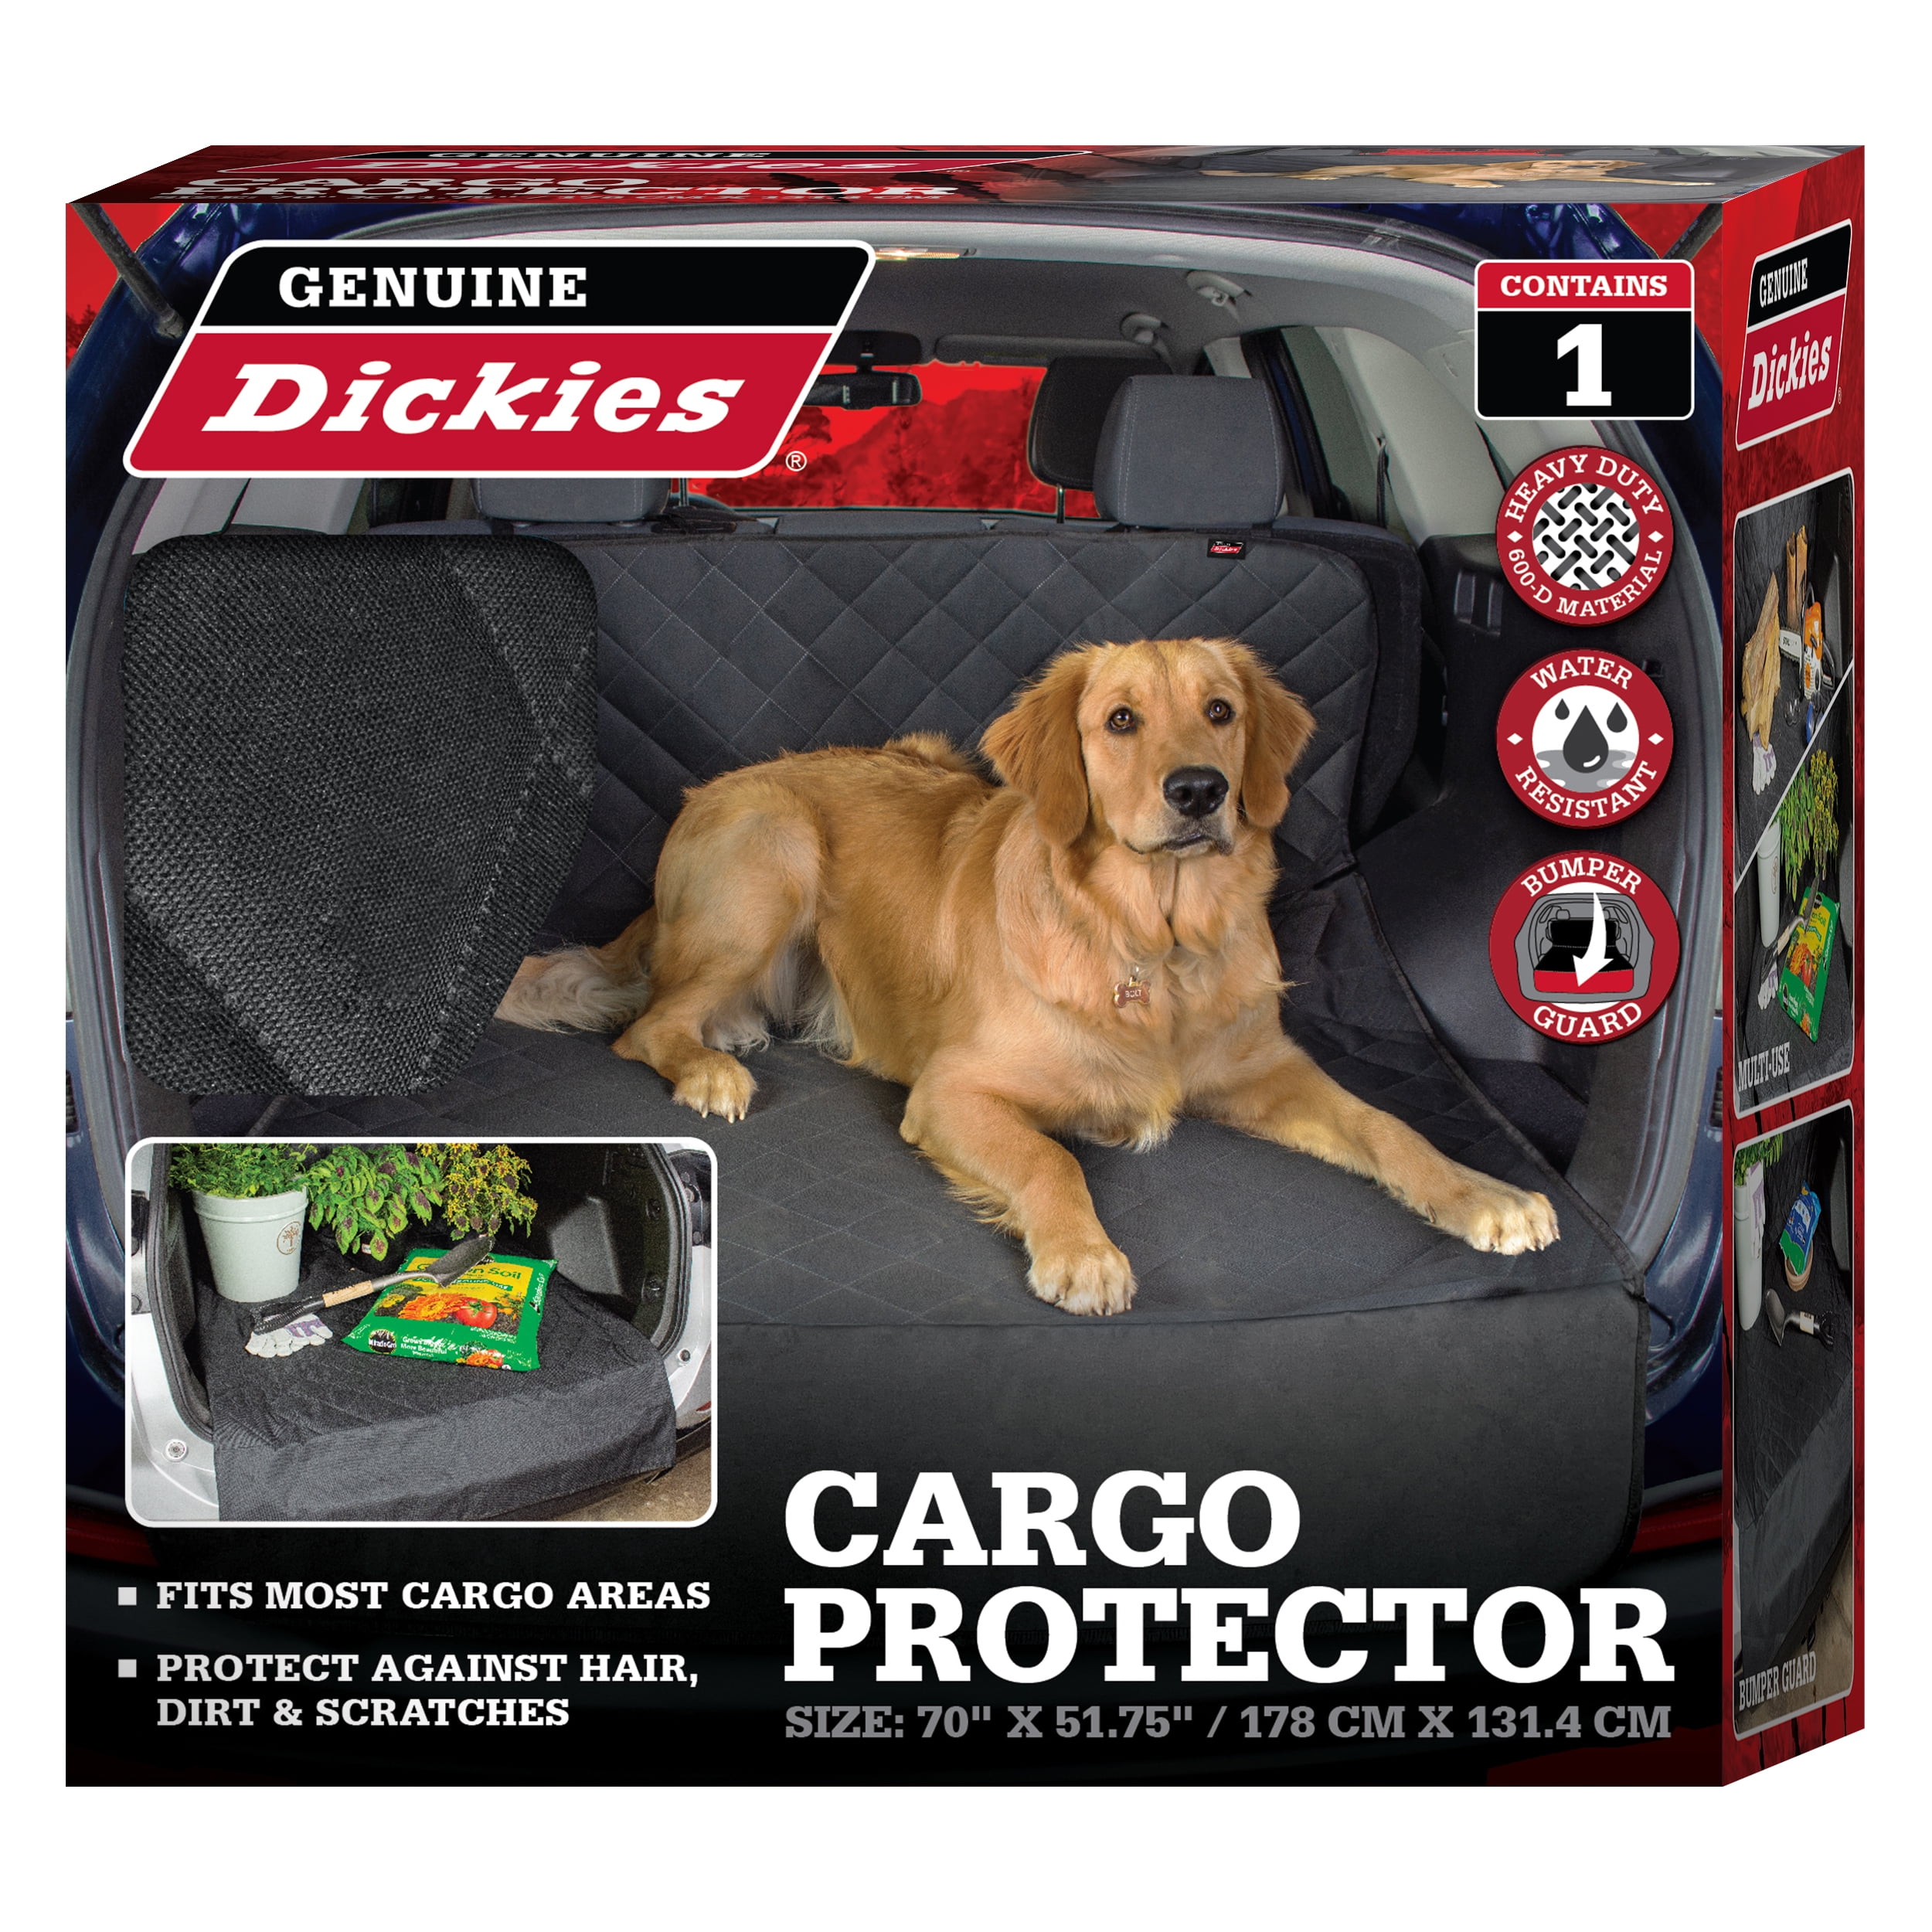 Genuine Dickies Quilted Vehicle Cargo Area Protector Universal Fit, 41839WDI